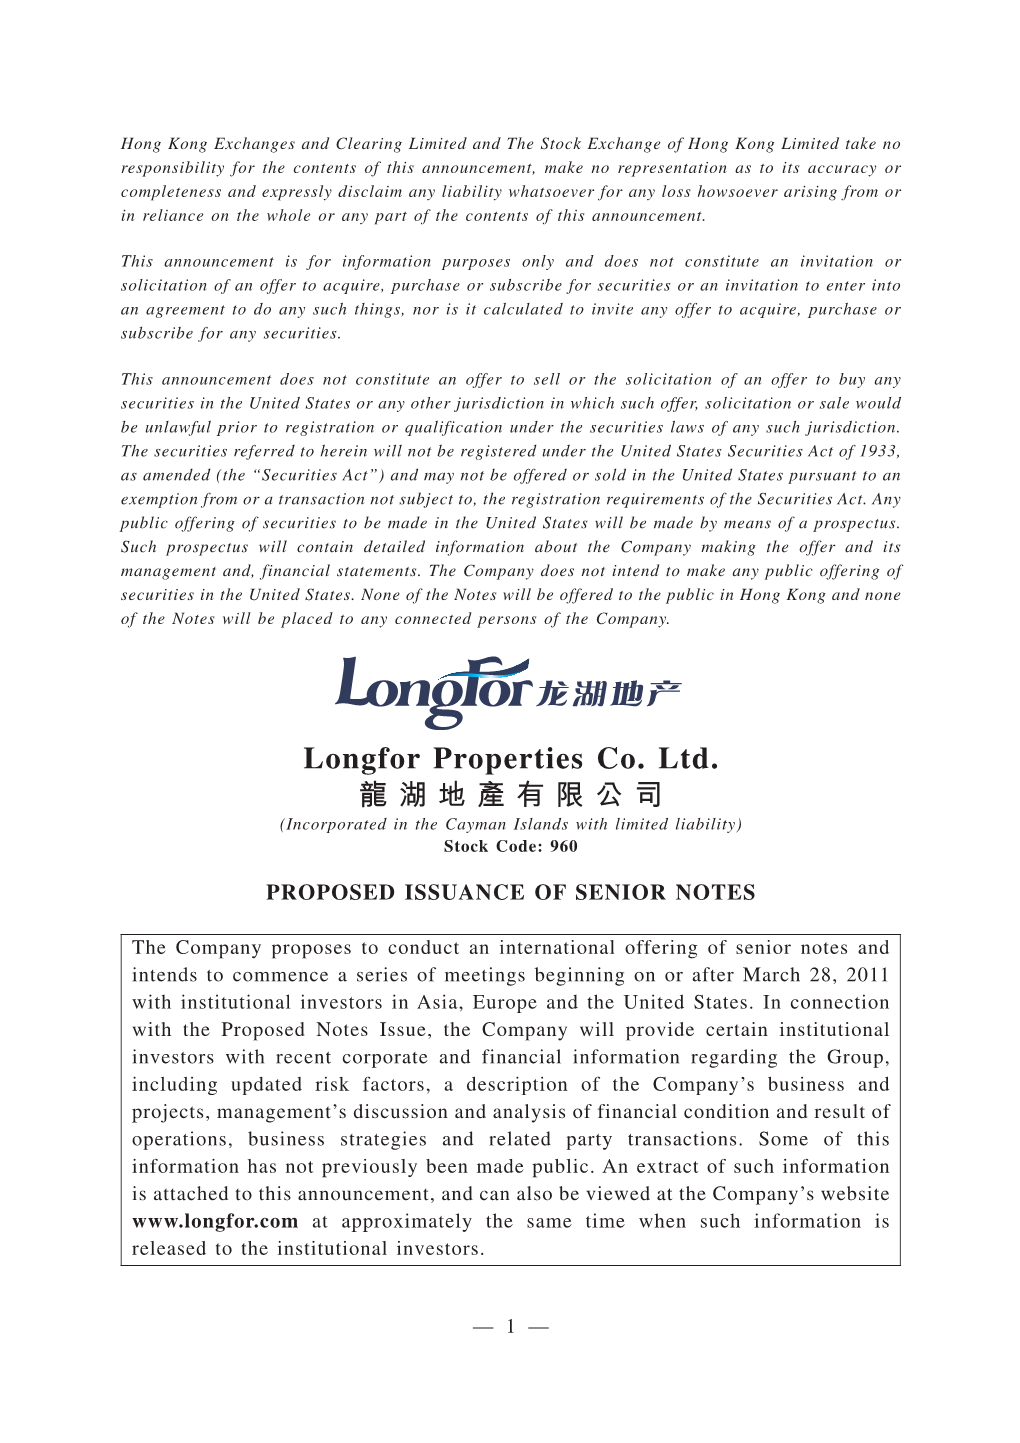 Longfor Properties Co. Ltd. 龍湖地產有限公司 (Incorporated in the Cayman Islands with Limited Liability) Stock Code: 960